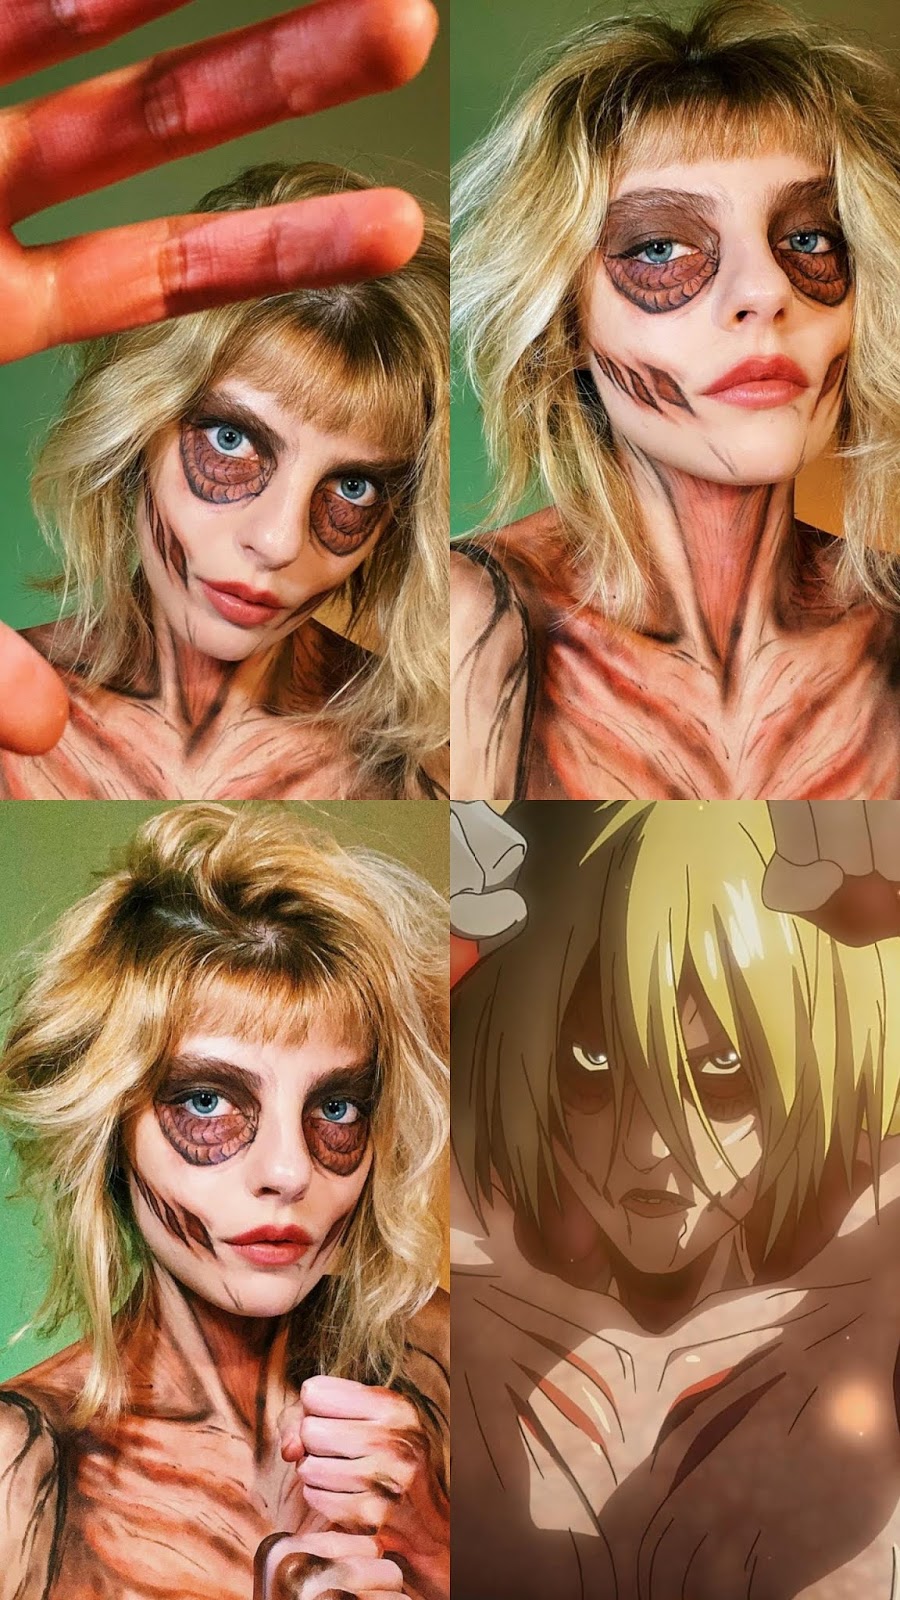 Attack on Titan Female Titan Make-up and Cosplay